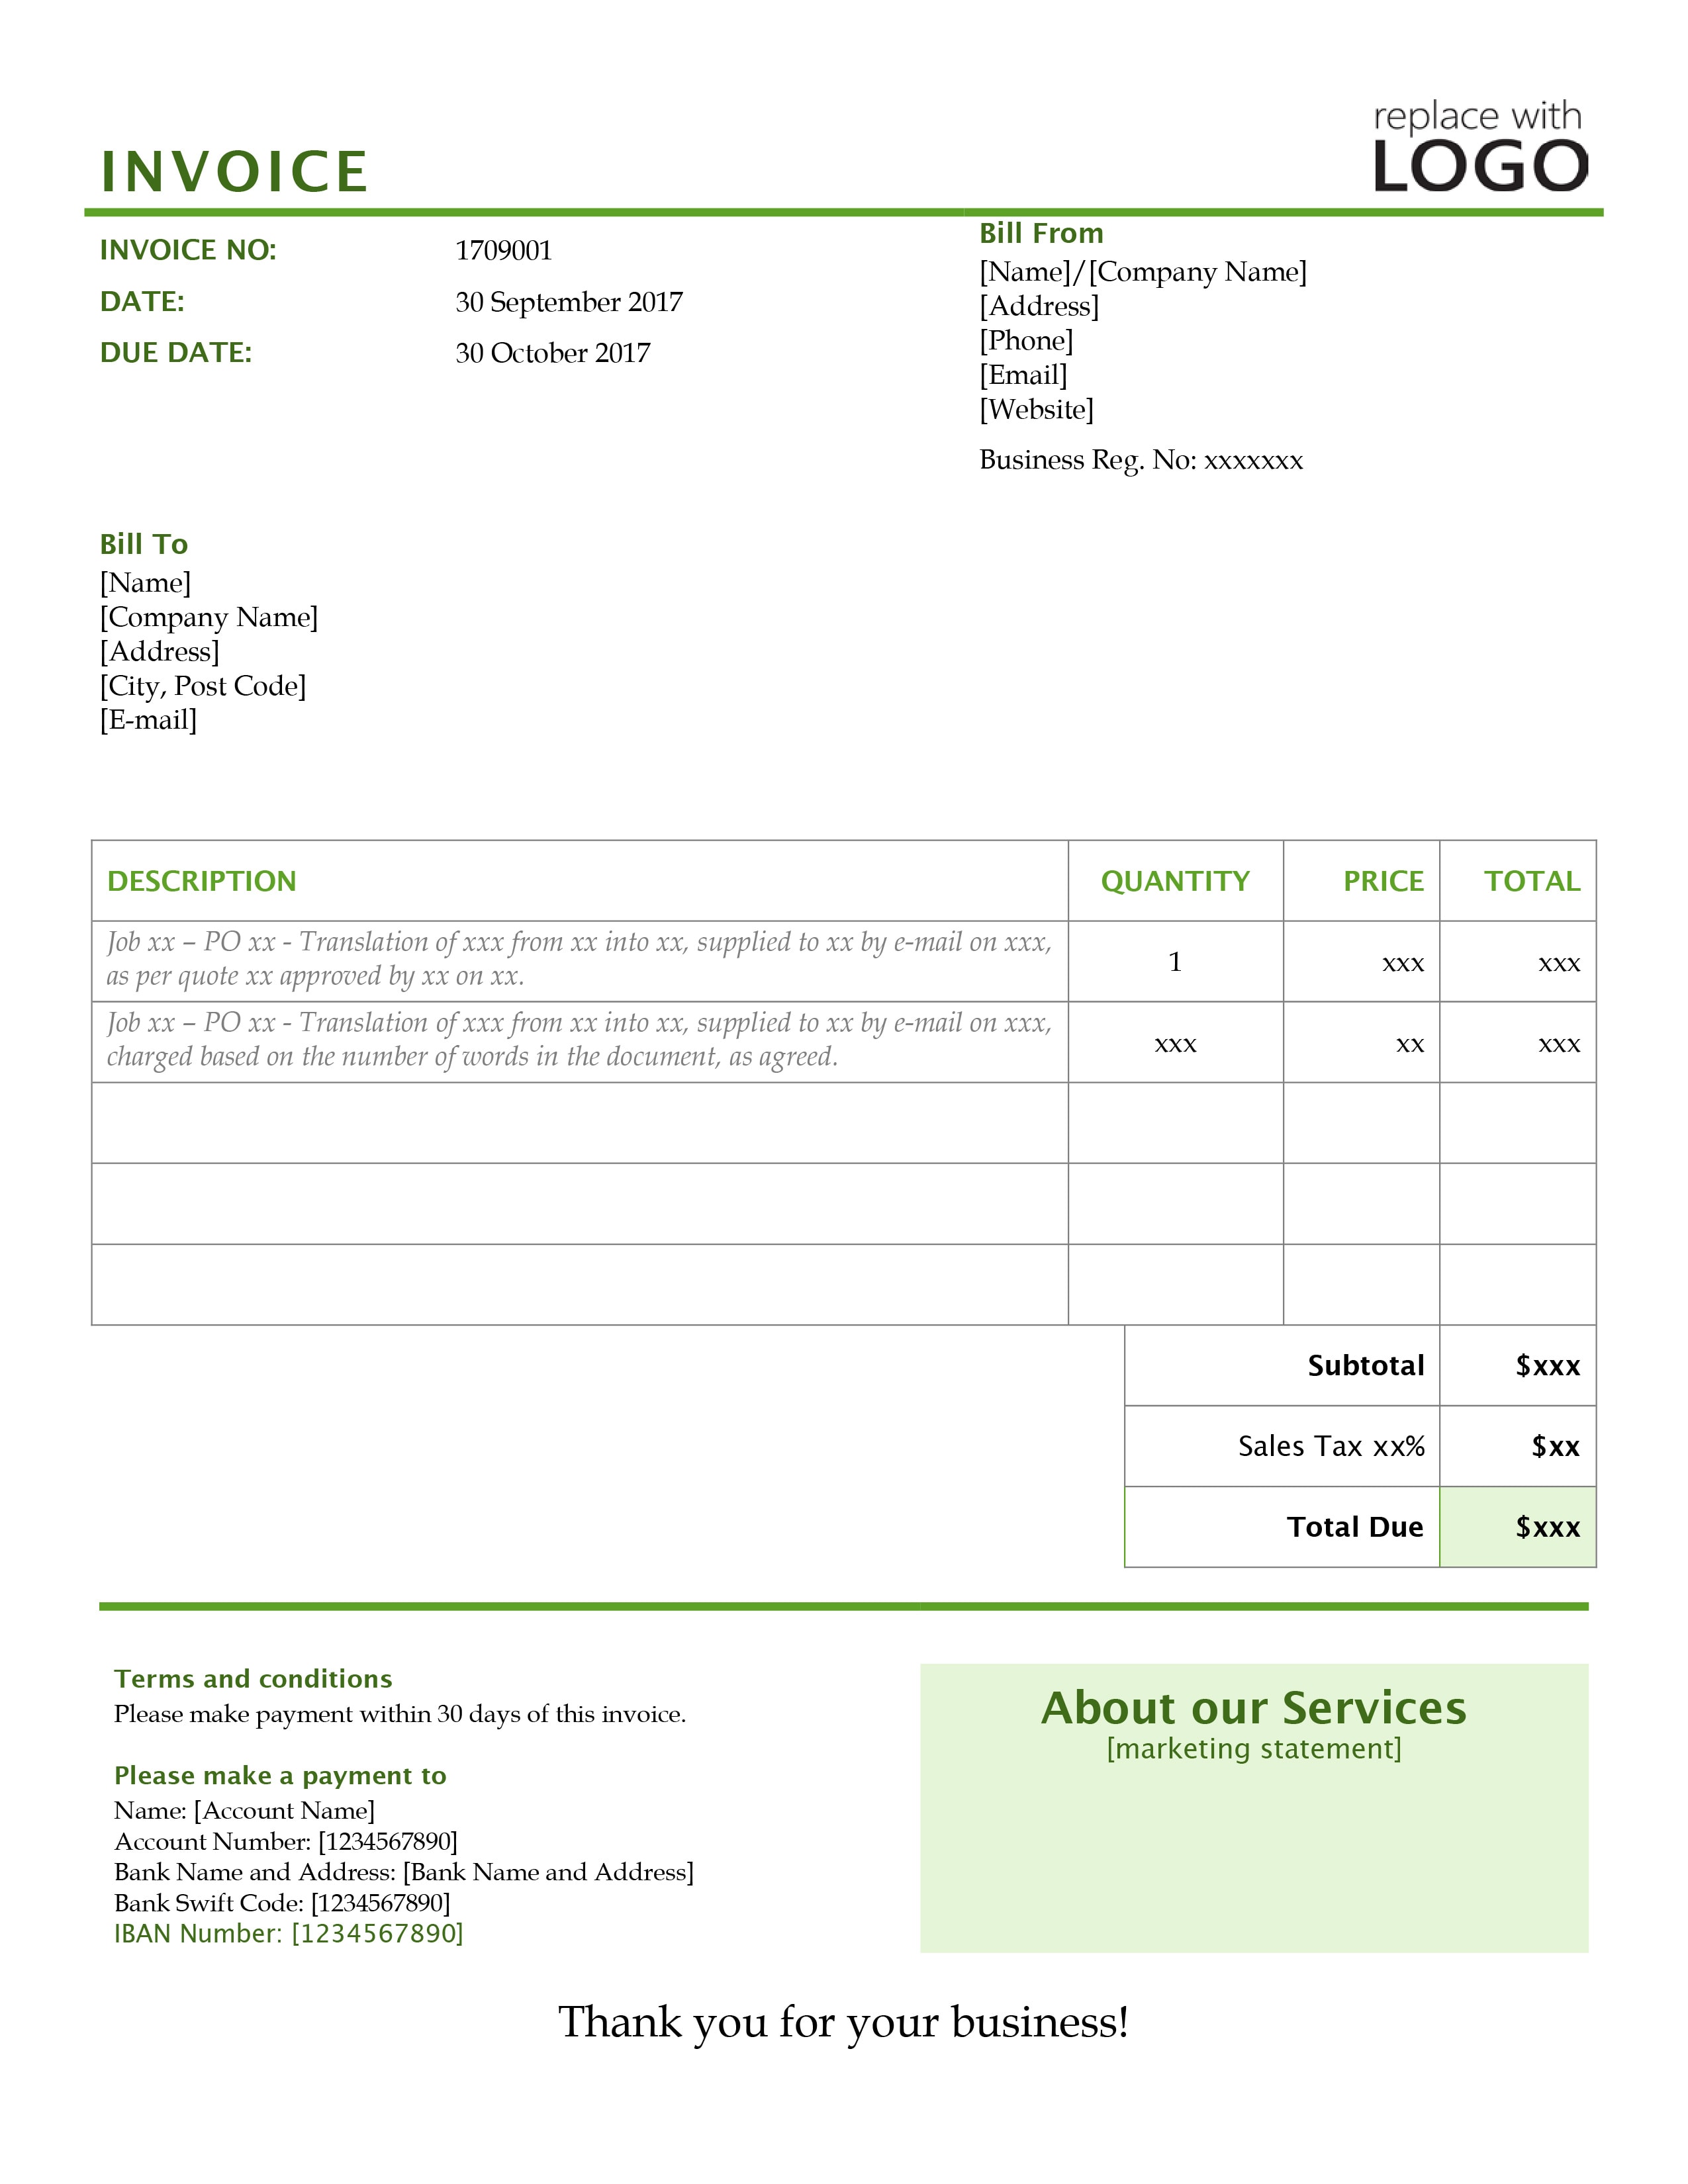 Invoice For Service Template from www.pactranz.com